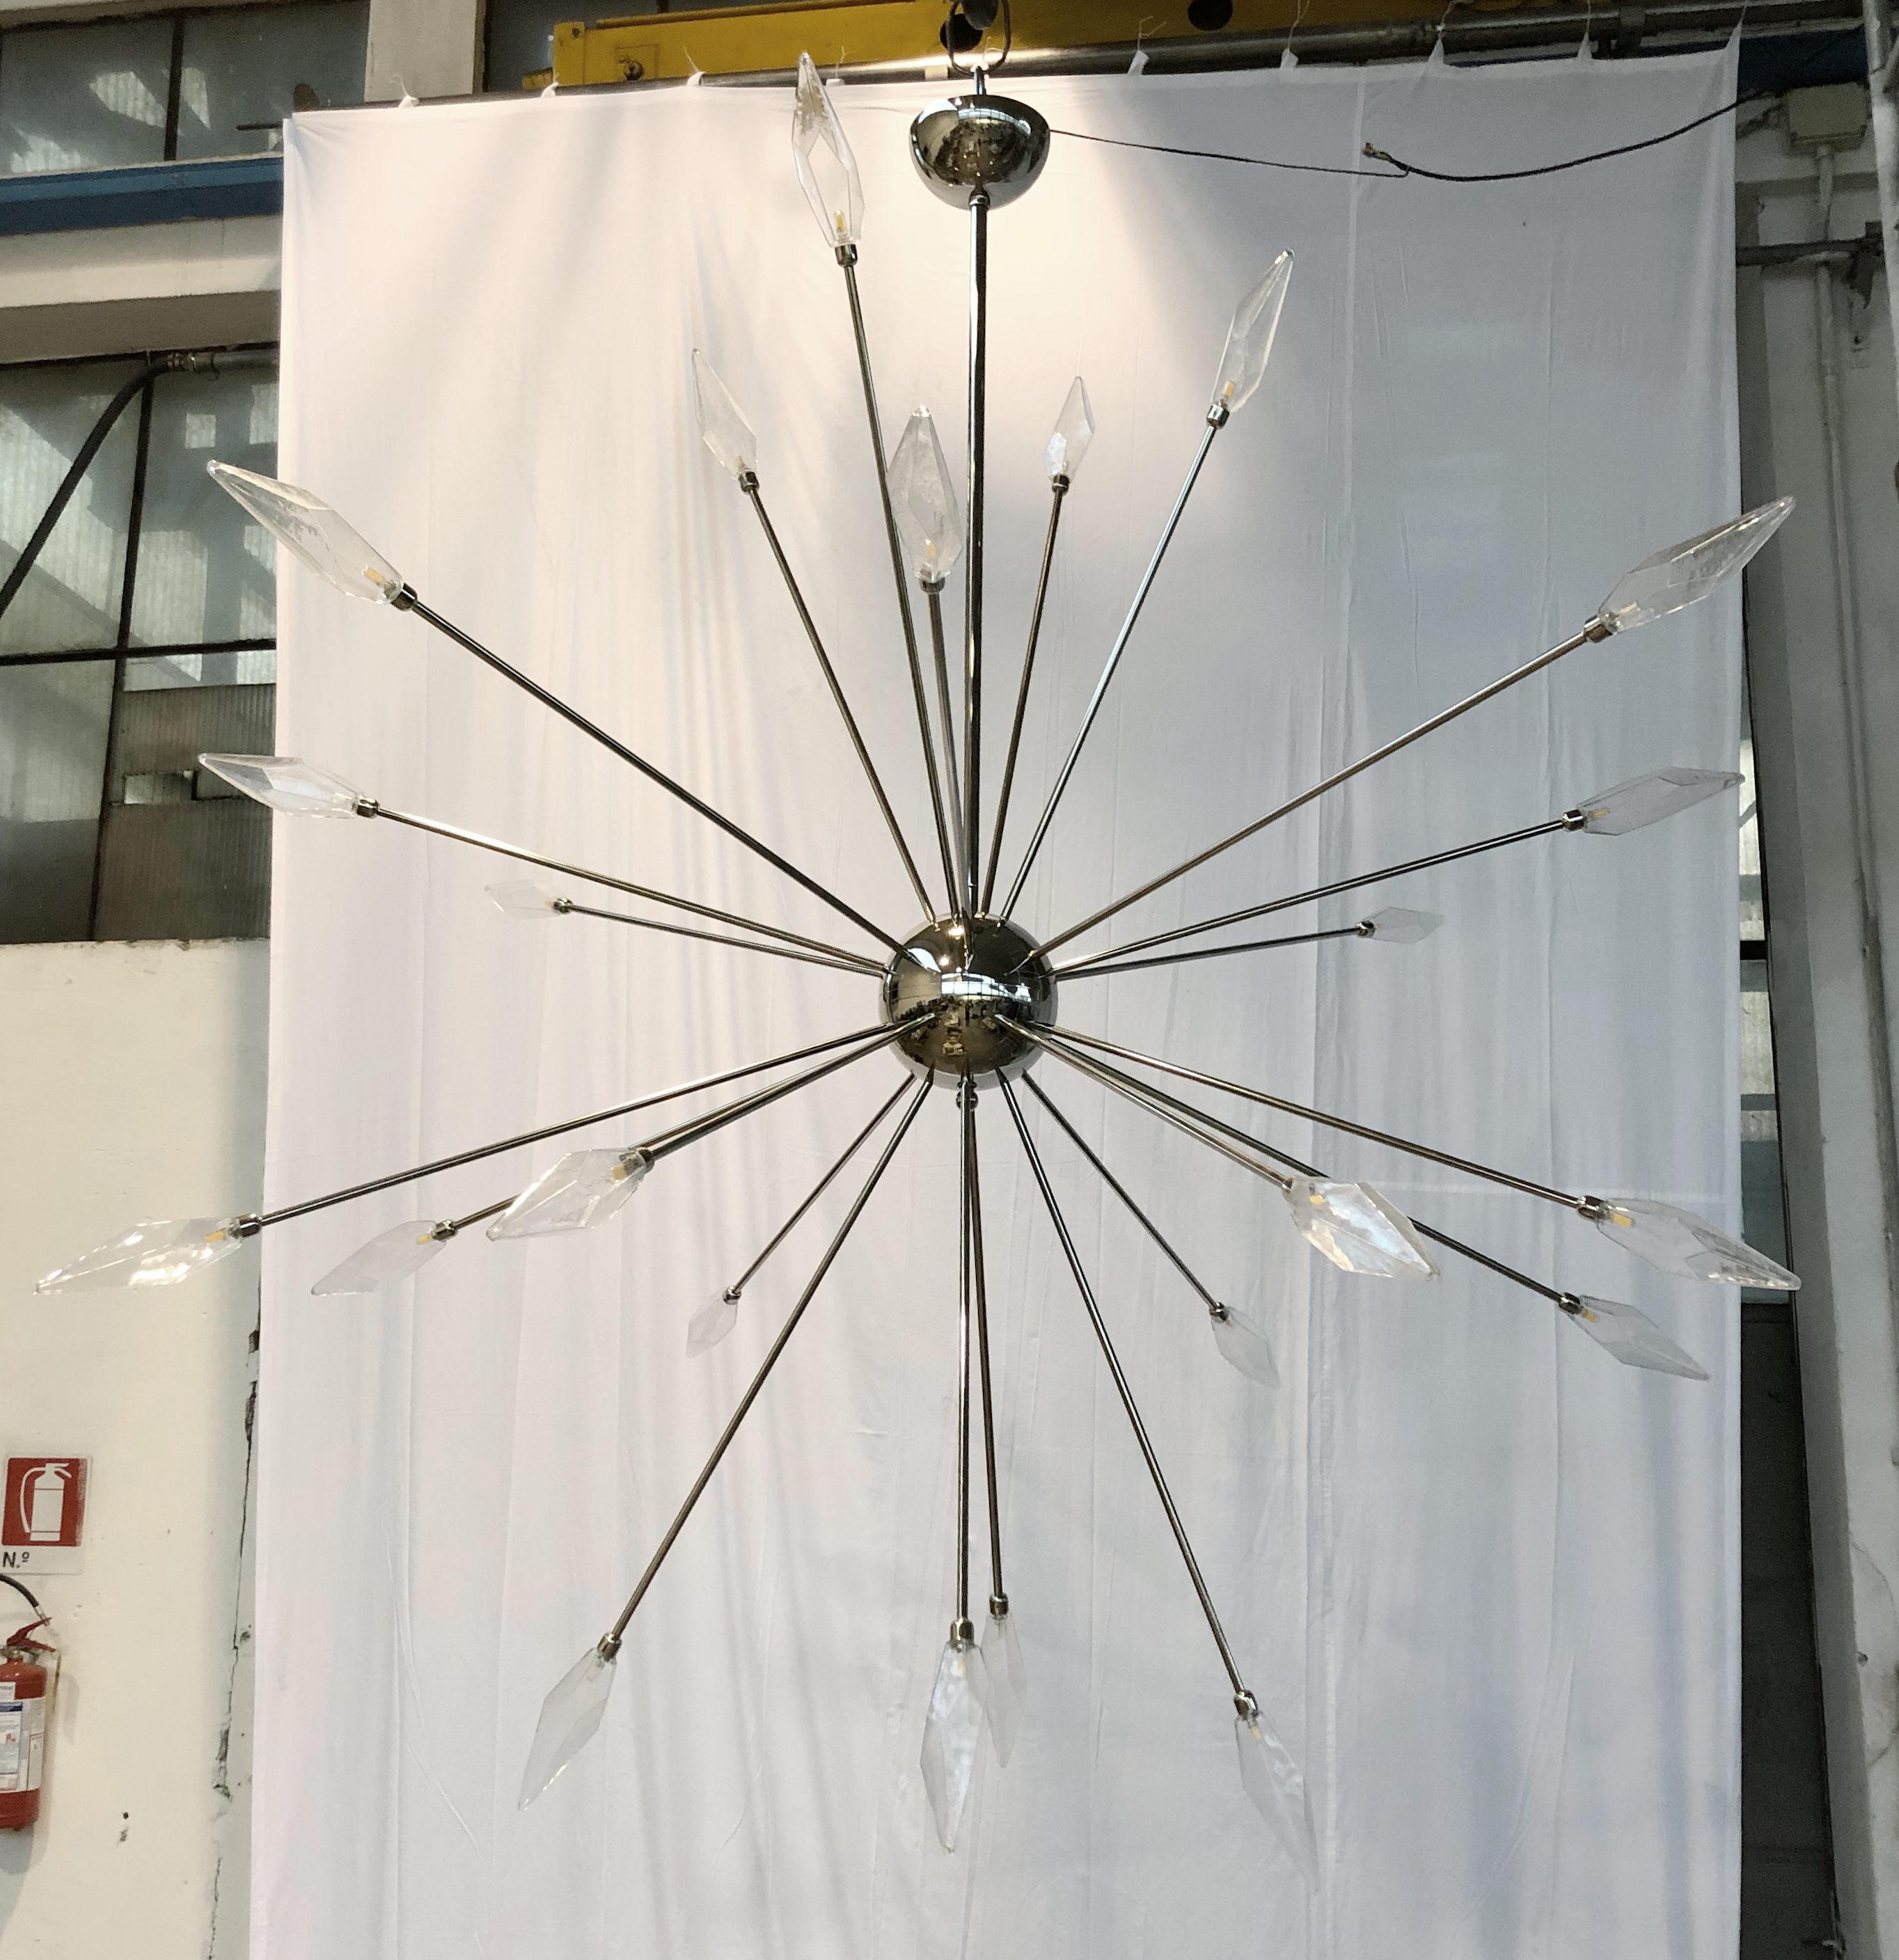 Oversized Italian Sputnik chandelier with 24 clear poliedri, or polyhedron/polyhedral shaped Murano glasses mounted on polished nickel finish frame, designed by Fabio Bergomi for Fabio Ltd, made in Italy
Measures: Diameter 118 inches, height 126